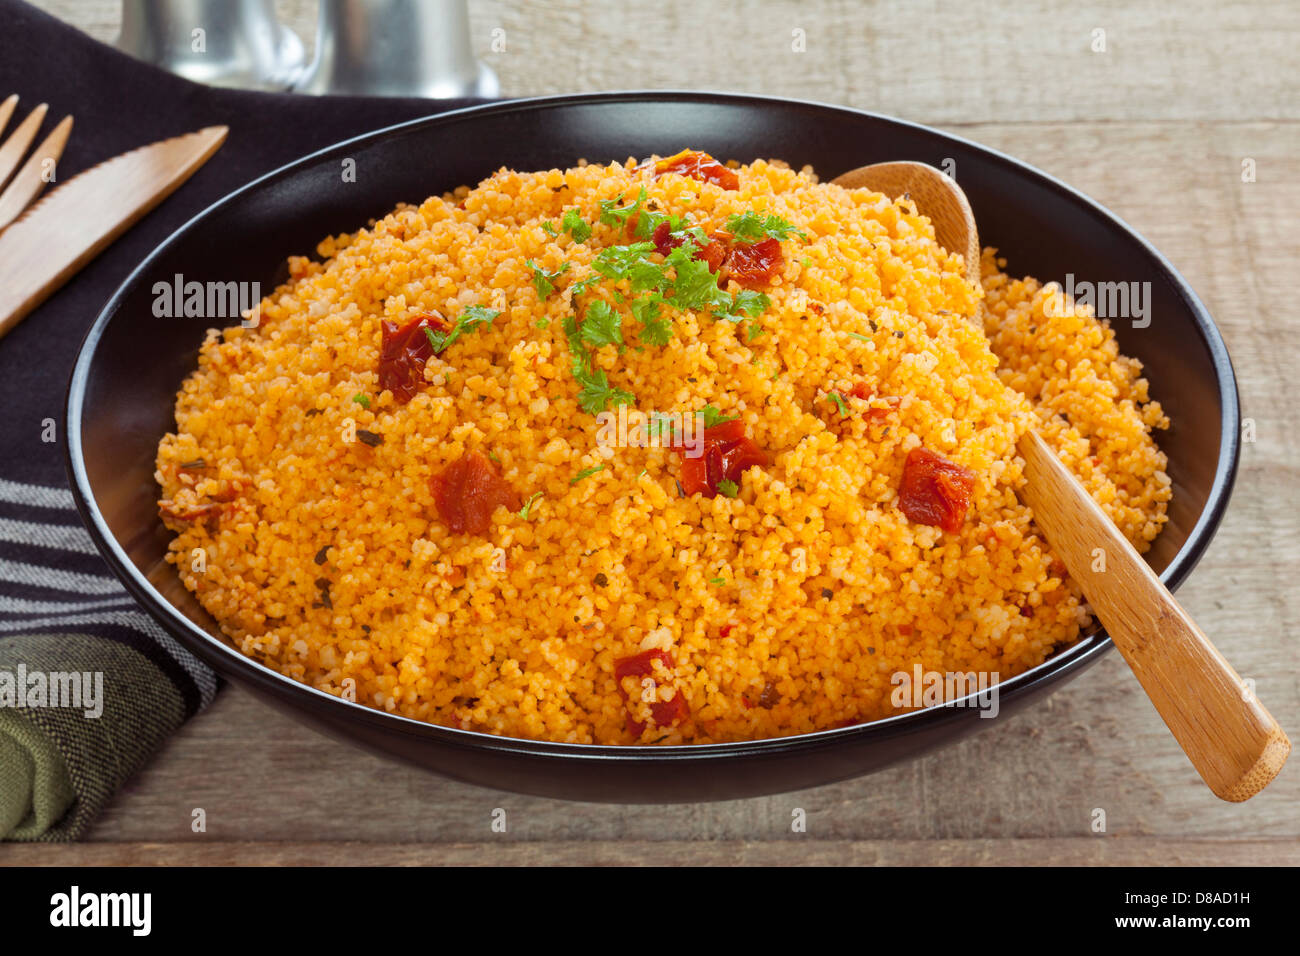 Couscous with Tomato - a bowl of couscous flavoured with sun dried tomato pesto. Stock Photo